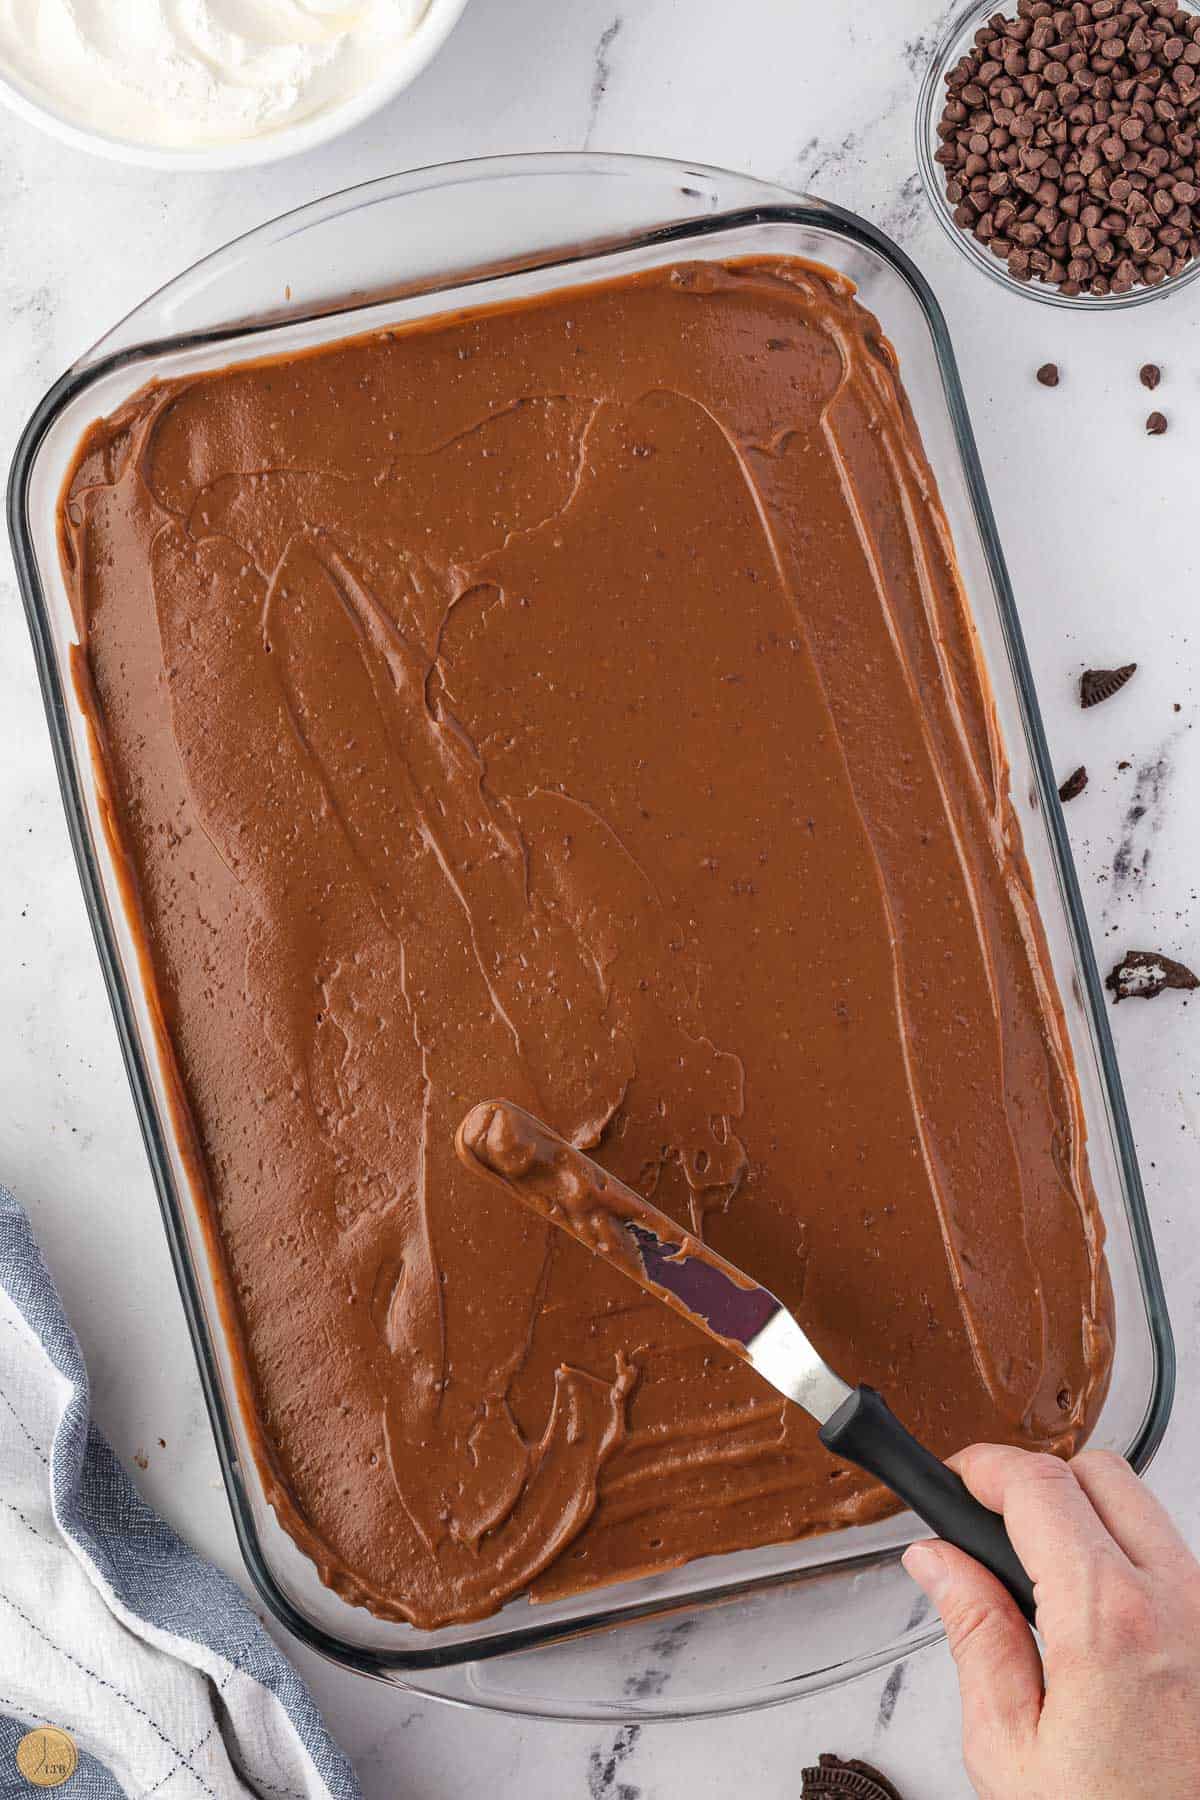 offset spatula on a layer of chocolate pudding